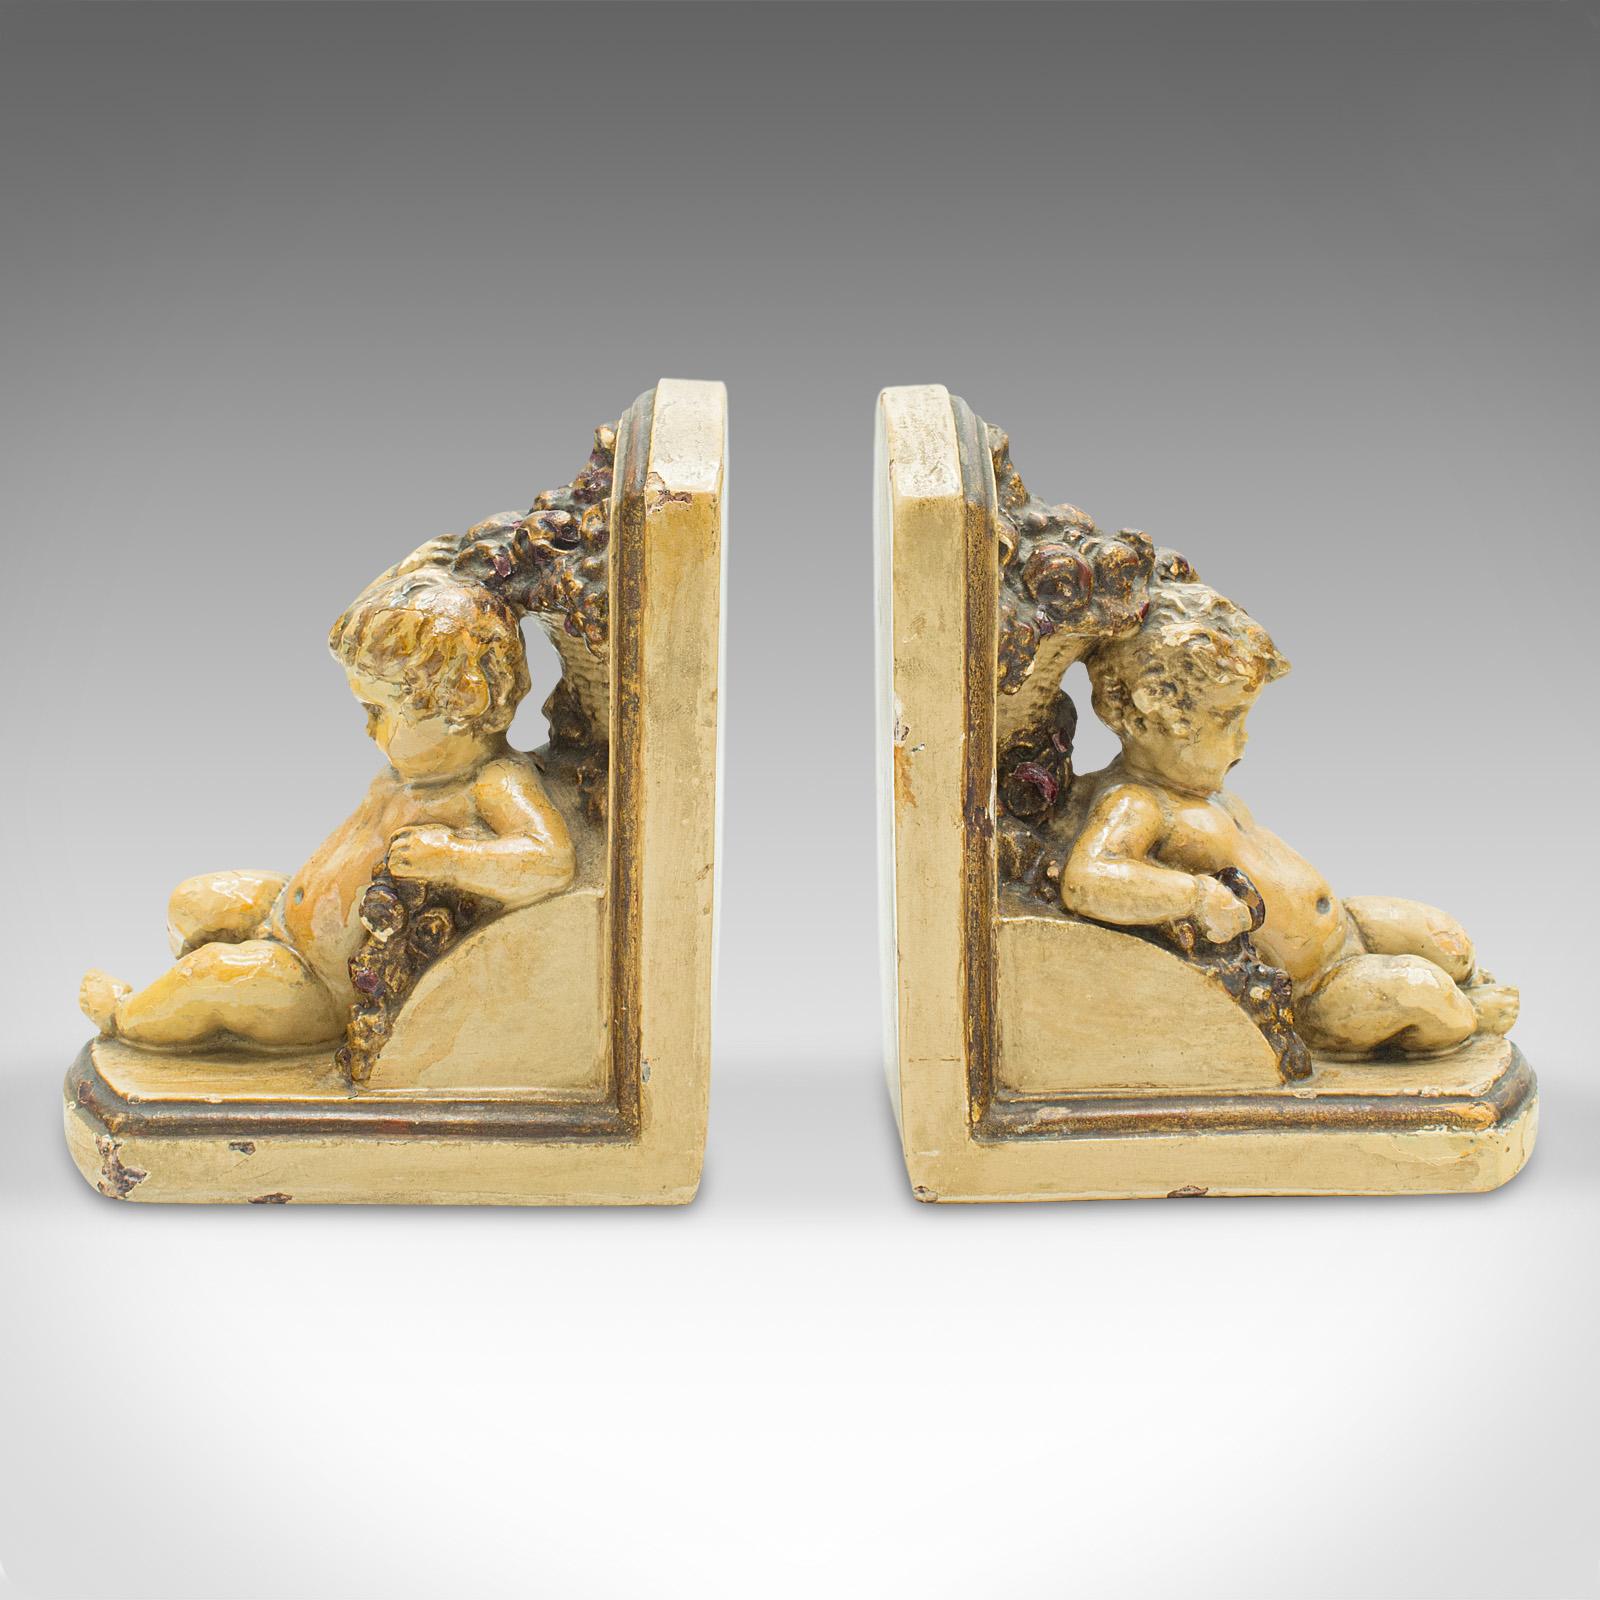 This is a pair of antique putto bookends. An Italian, plaster decorative cherub book rest in Grand Tour taste, dating to the early Victorian period, circa 1850.

Charming cherubic figures lounge against these distinctive bookends
Displaying a